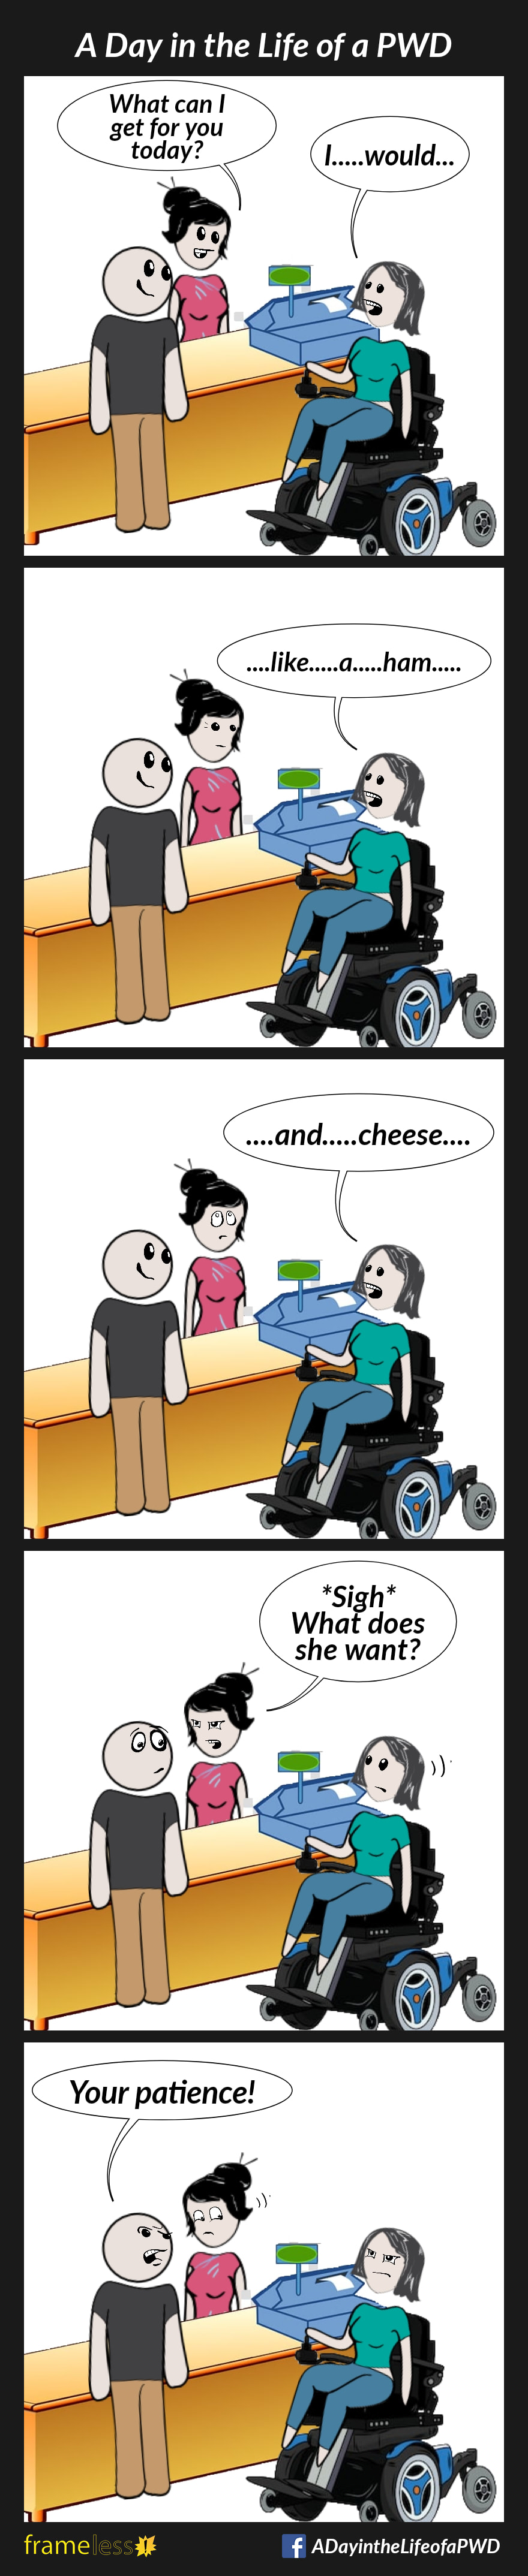 COMIC STRIP 
A Day in the Life of a PWD (Person With a Disability) 

Frame 1:
A woman in a power wheelchair and her friend are ordering lunch.
CASHIER: What can I get for you today?
WOMAN: I...would...

Frame 2:
WOMAN: ...like...a...ham...

Frame 3:
WOMAN: ...and...cheese...
The cashier rolls her eyes.

Frame 4:
CASHIER (to friend): *Sigh* What does she want?

Frame 5:
FRIEND (angry): Your patience!